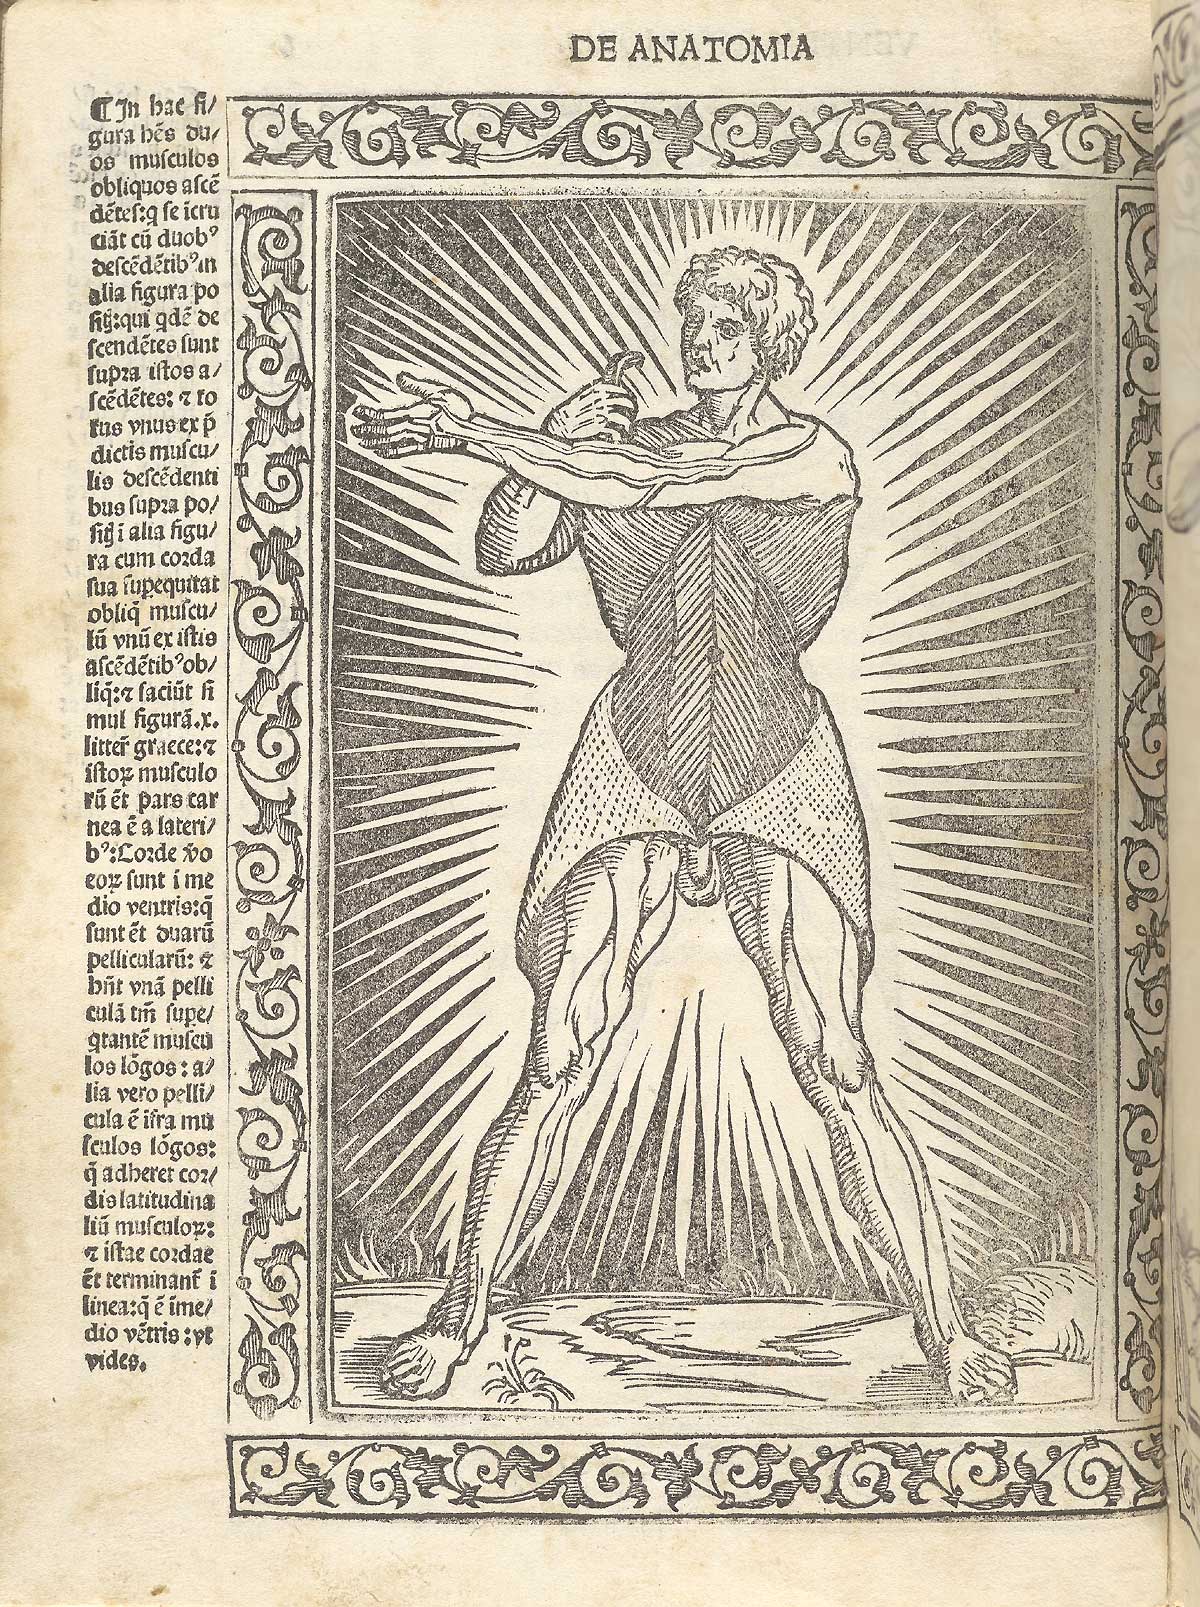 Woodcut of male anatomical figure raising the skin to give a view of his oblique and abdominal muscles, with a woodcut border and text in Latin on the left side of page, from Berengario da Carpi’s Isagogae breues, Bologna, 1523, NLM Call no. WZ 240 B488i 1523.